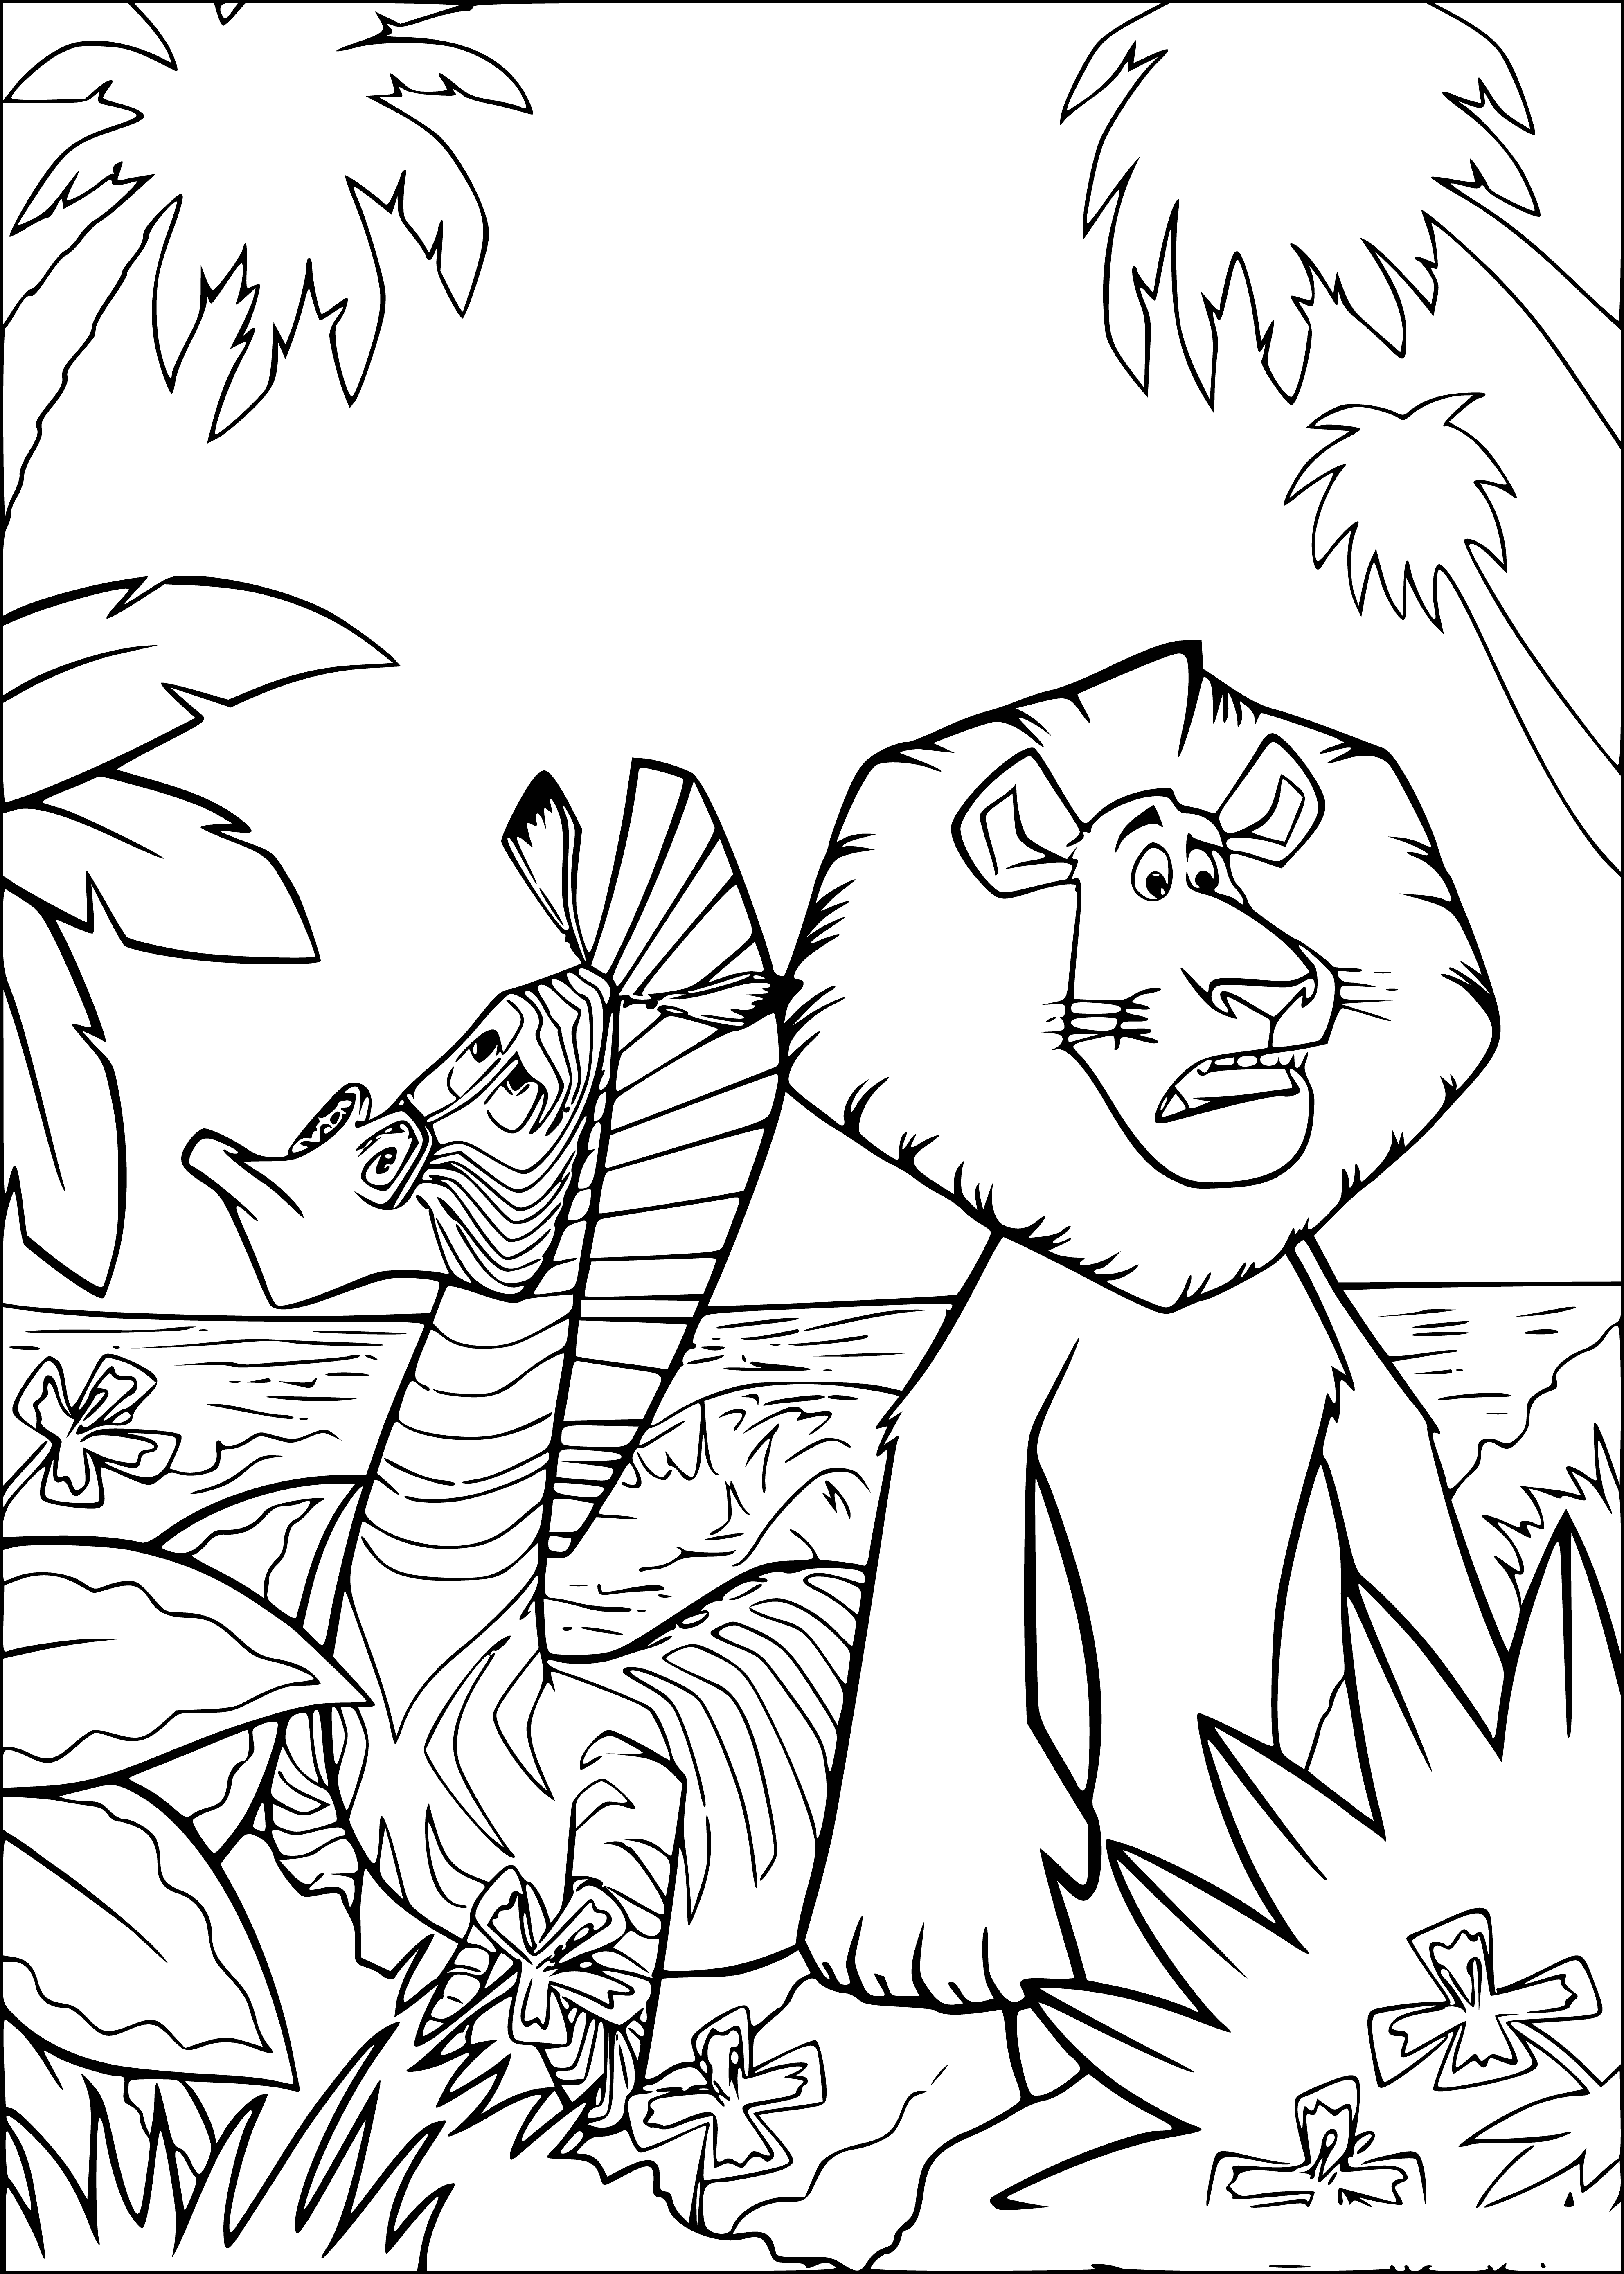 coloring page: Marty the lion and Alex the zebra are best friends in the land of Madagascar. #BFFs